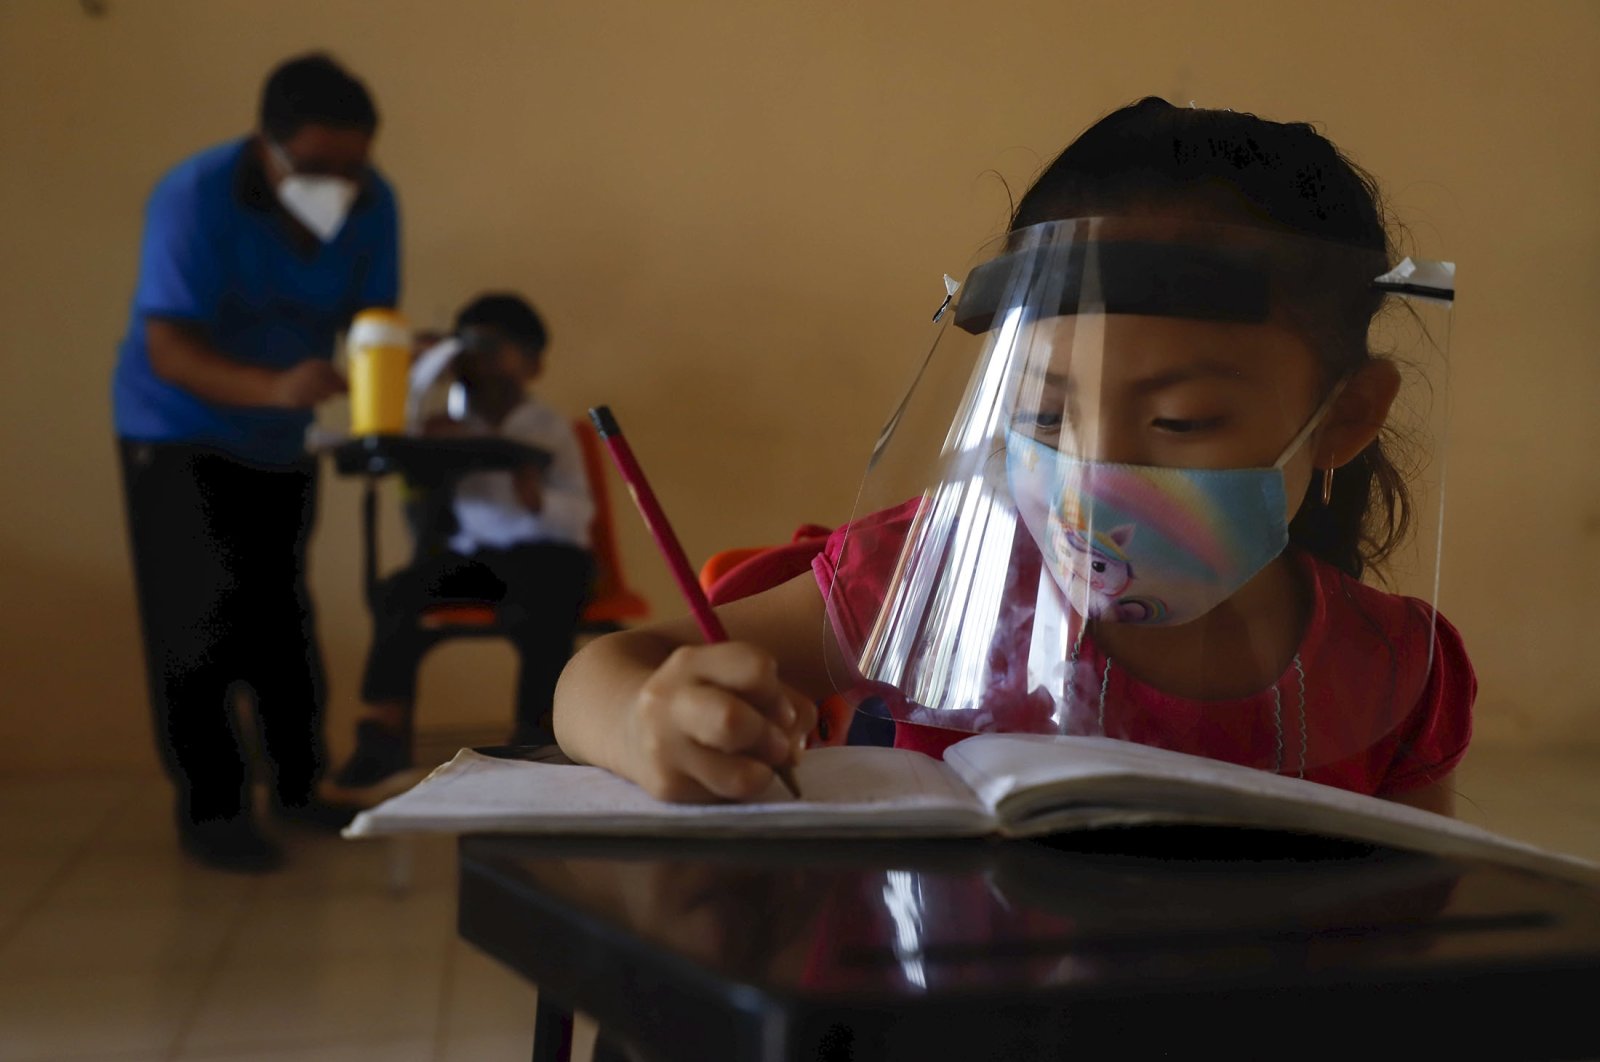 A 10-year-old girl wearing a mask and a face shield writes in her notebook during the first day of class at the Valentin Gomez Farias Indigenous Primary School in Montebello, Hecelchakan, Campeche state, Mexico, April 19, 2021. (AP Photo)